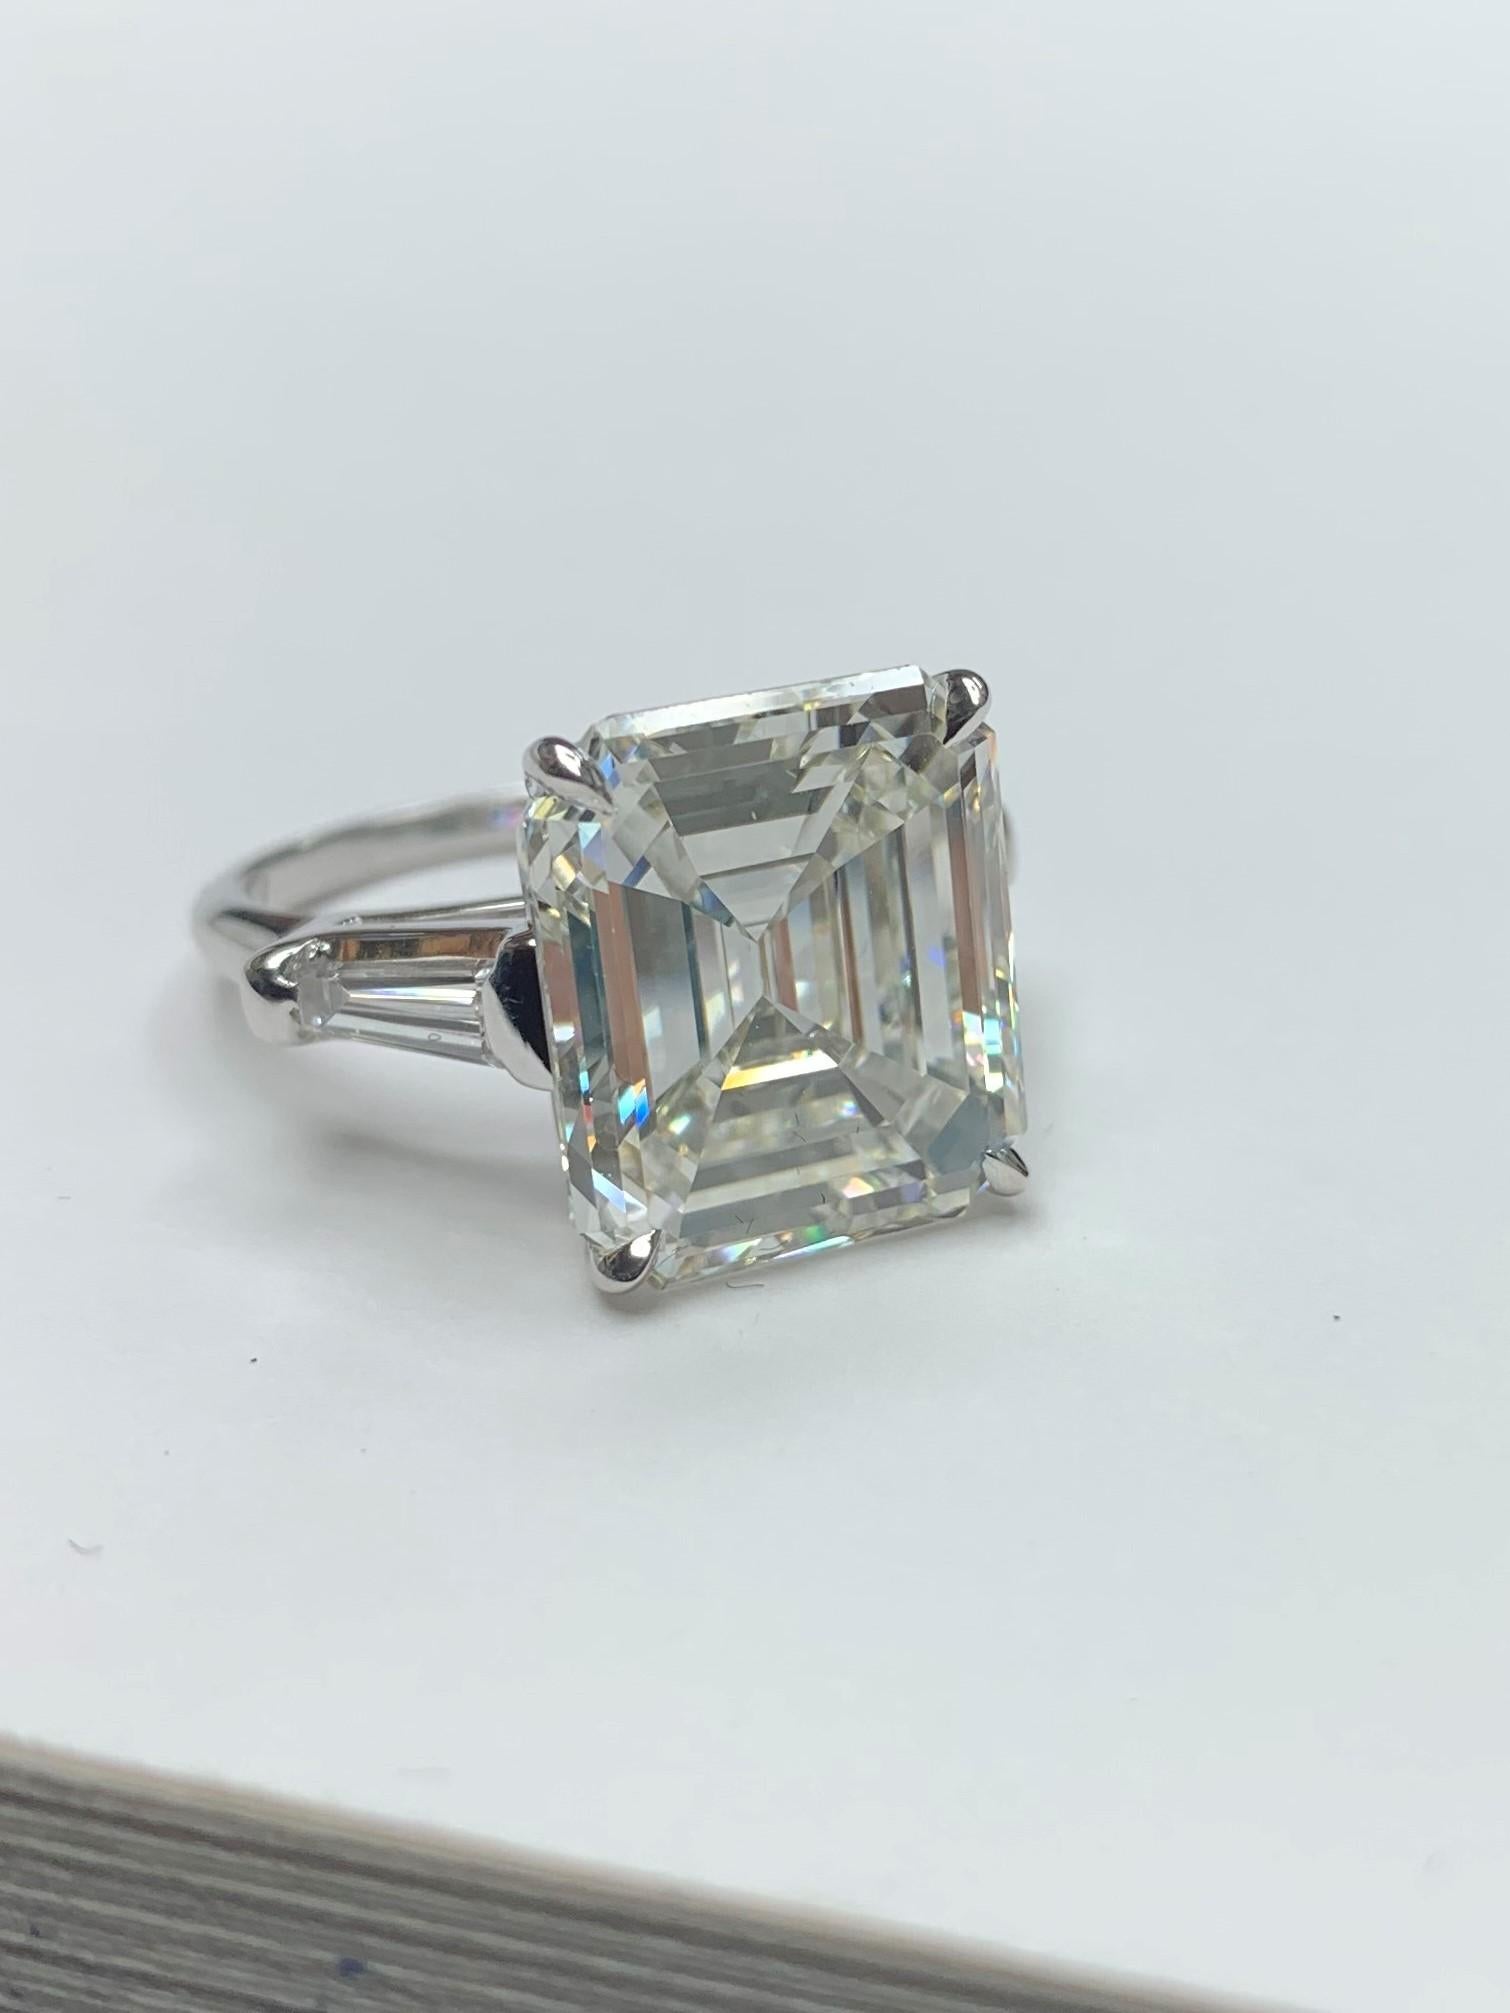 10.18 Carat Emerald Cut Diamond Set in Platinum Ring In New Condition For Sale In New York, NY